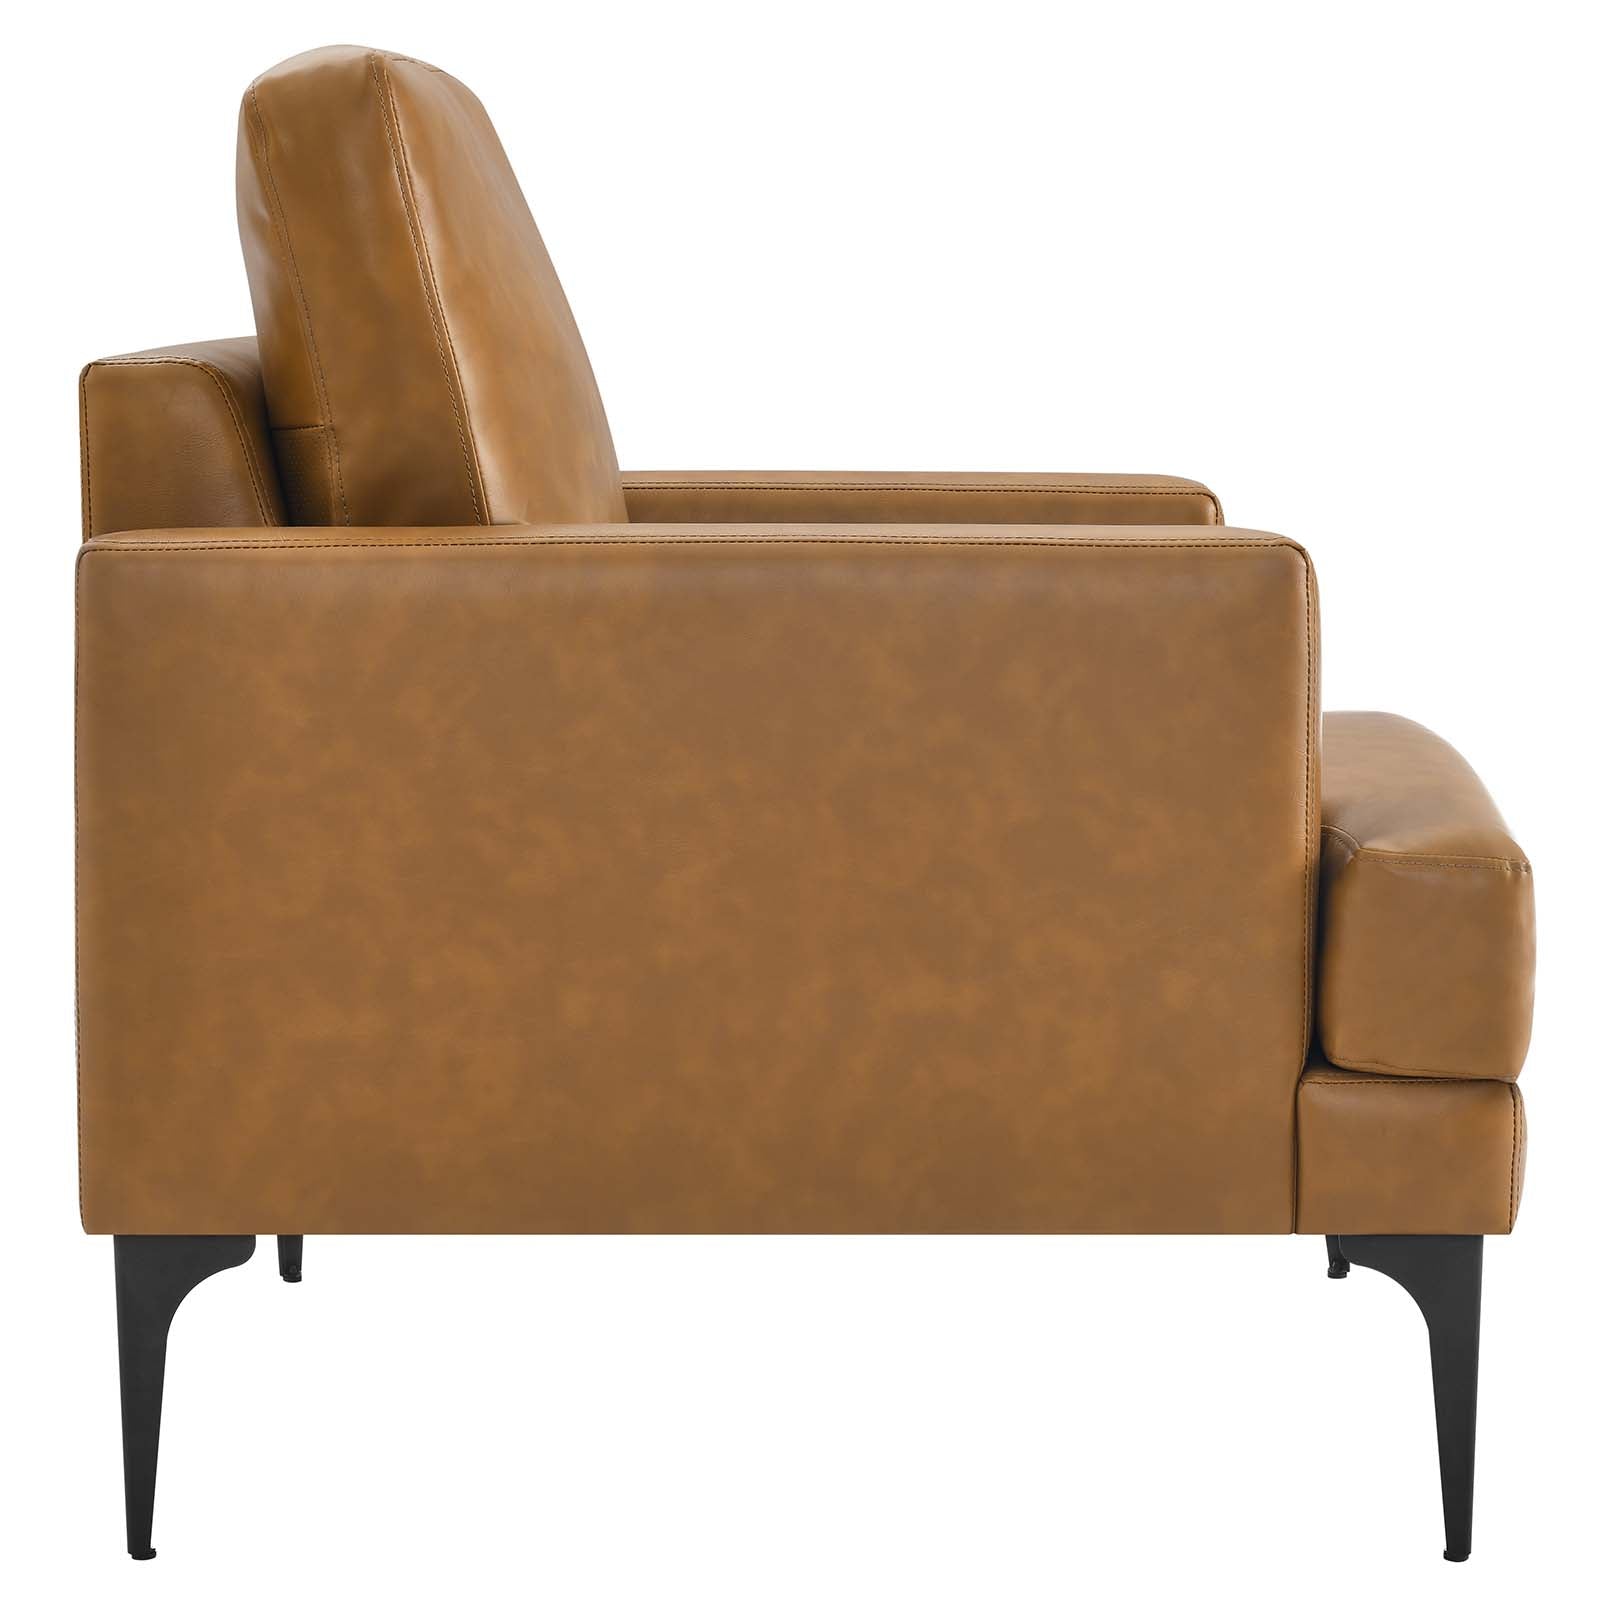 Evermore Vegan Leather Armchair - East Shore Modern Home Furnishings